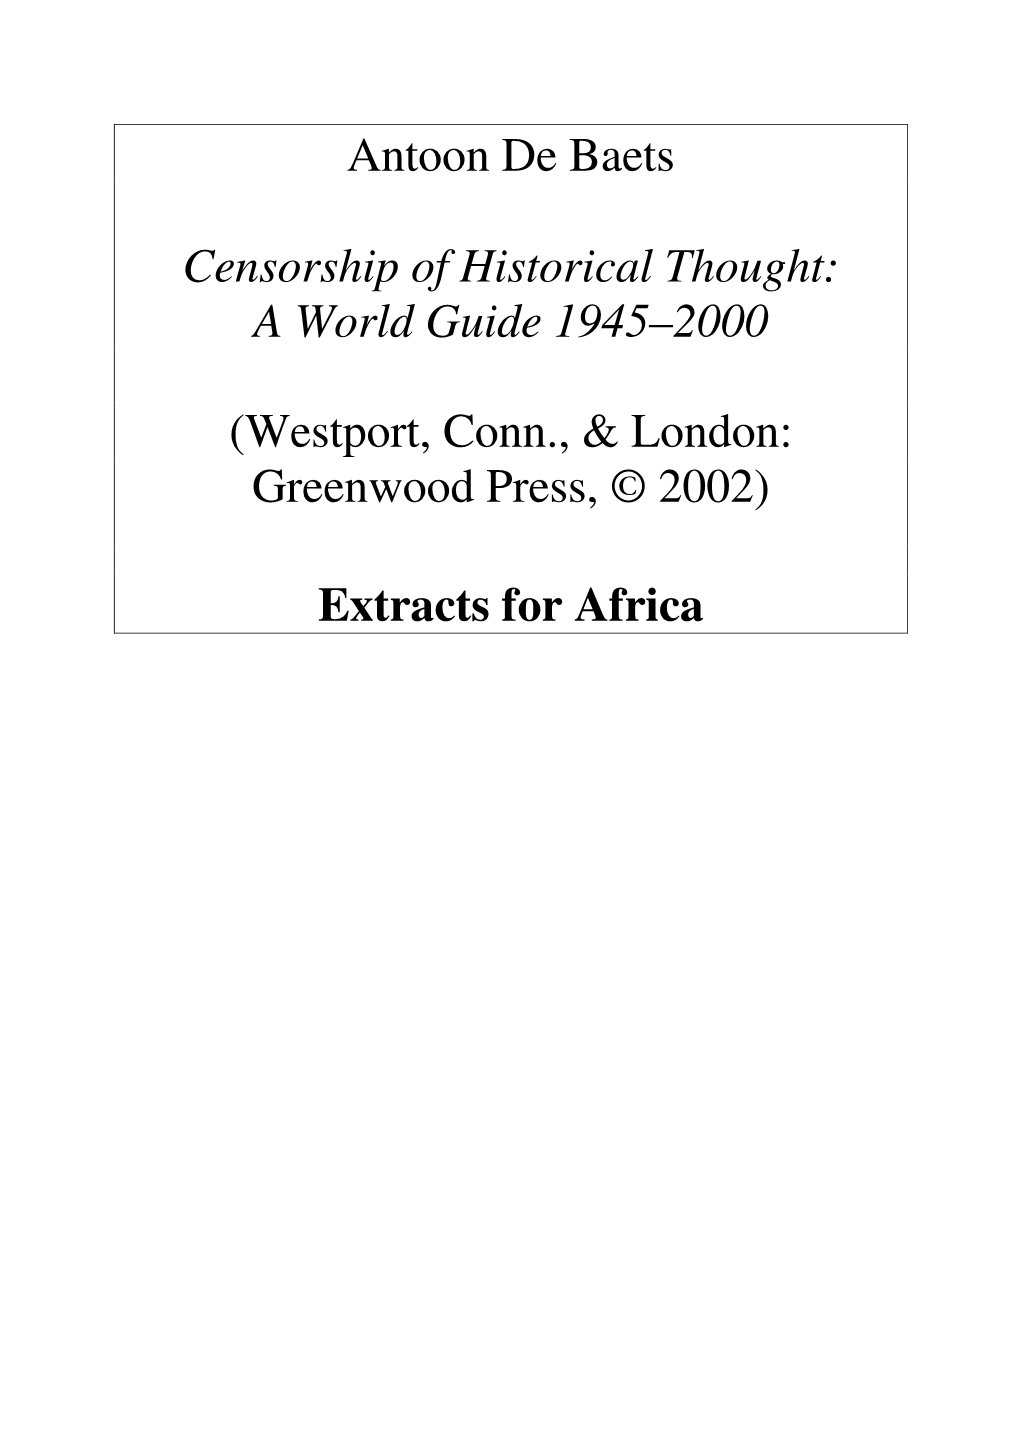 Antoon De Baets Censorship of Historical Thought: a World Guide